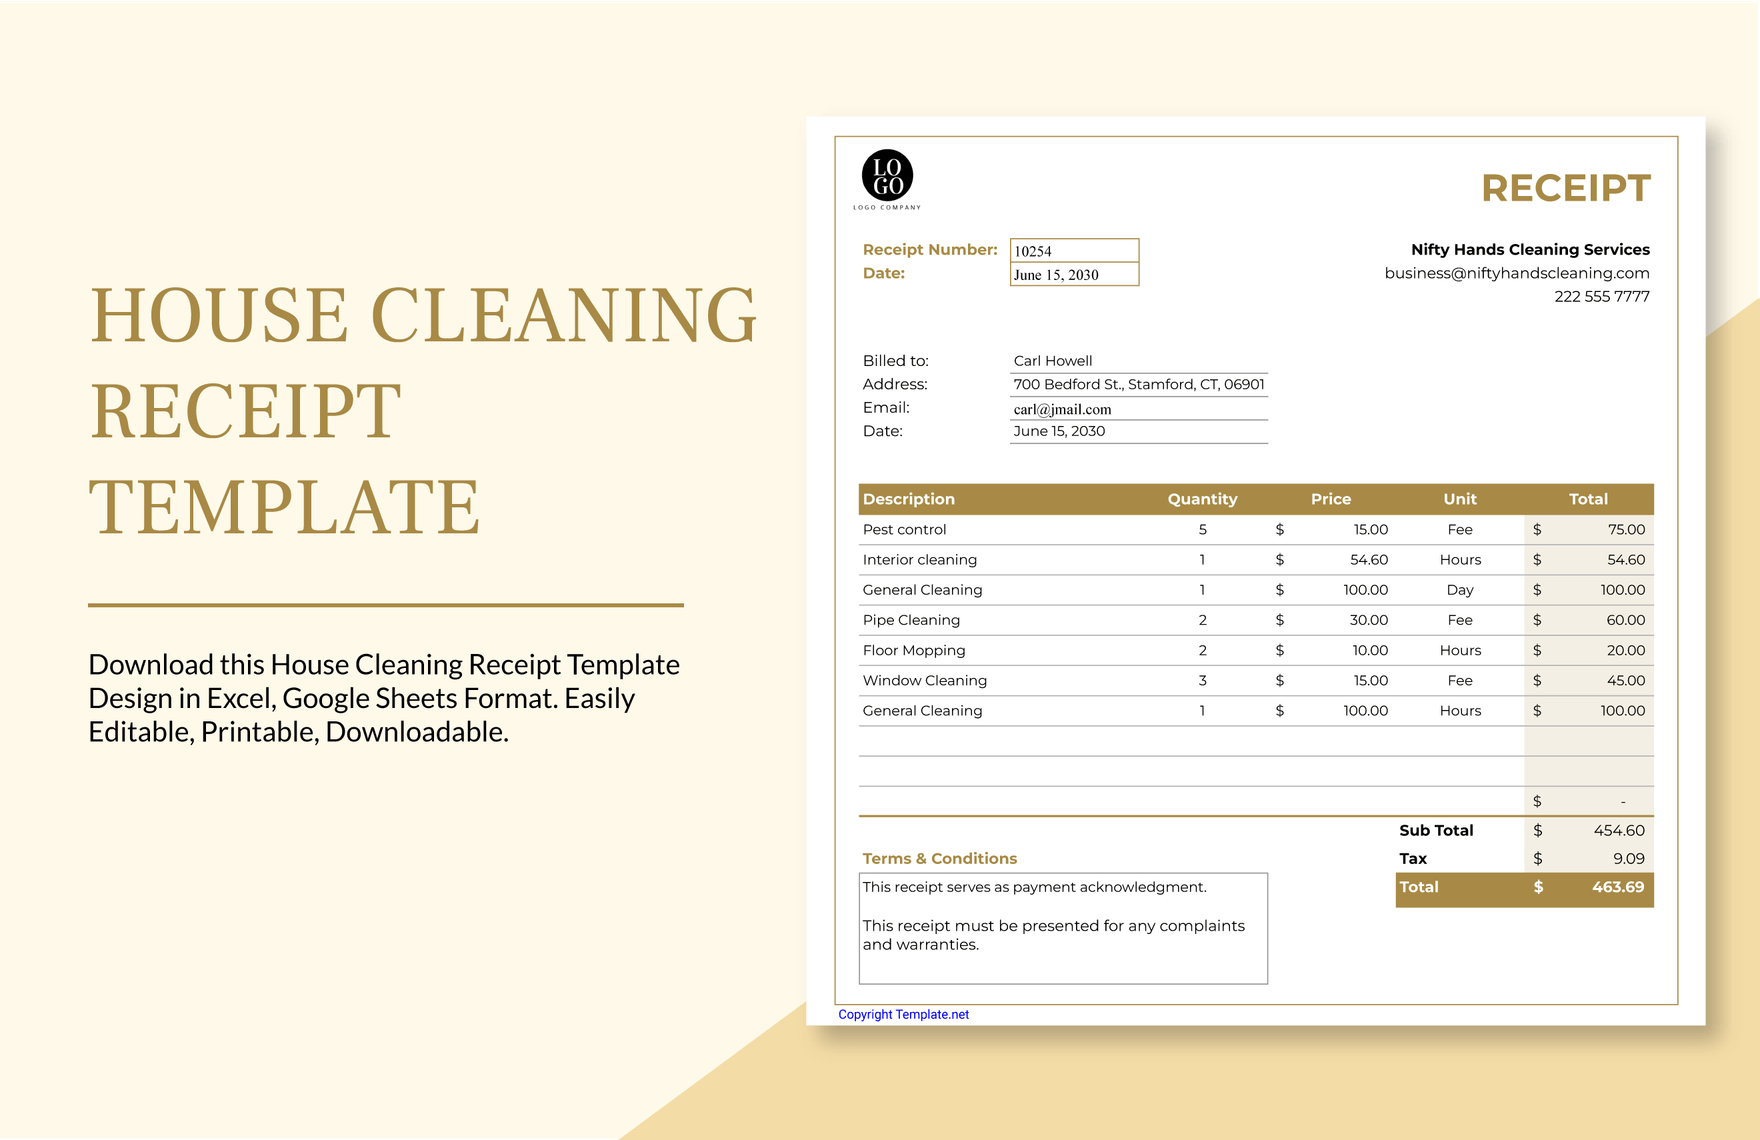 House Cleaning Receipt Template in Word, Google Docs, Excel, Google Sheets, Apple Pages, Apple Numbers